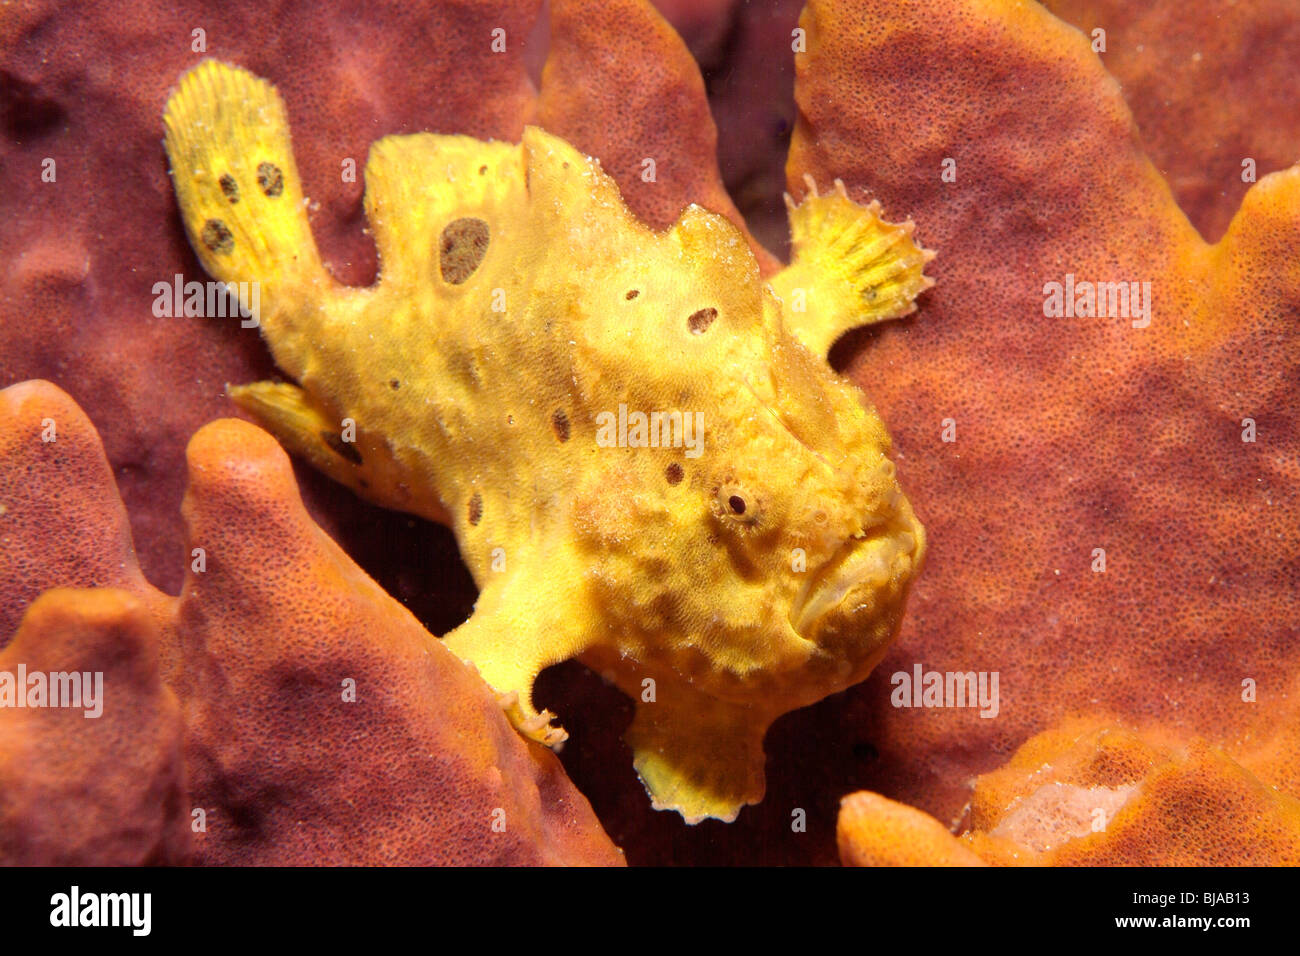 Longlure frogfish on a sponge off Martinique. Stock Photo